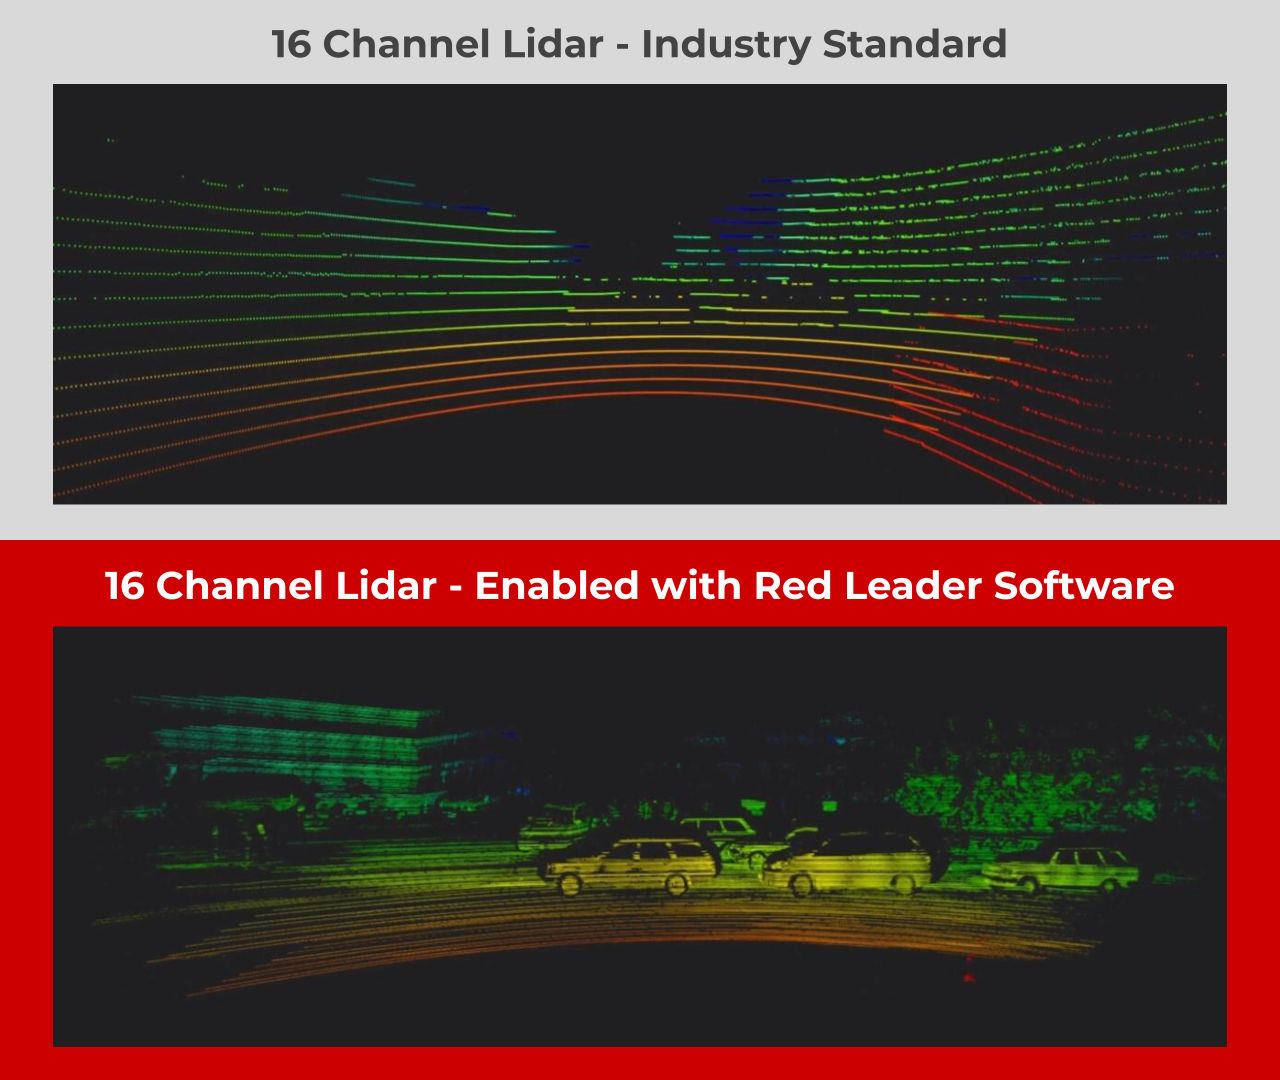 comparison of 16 channel Lidar with red leader software versus 16 channel Lidar without red leader software